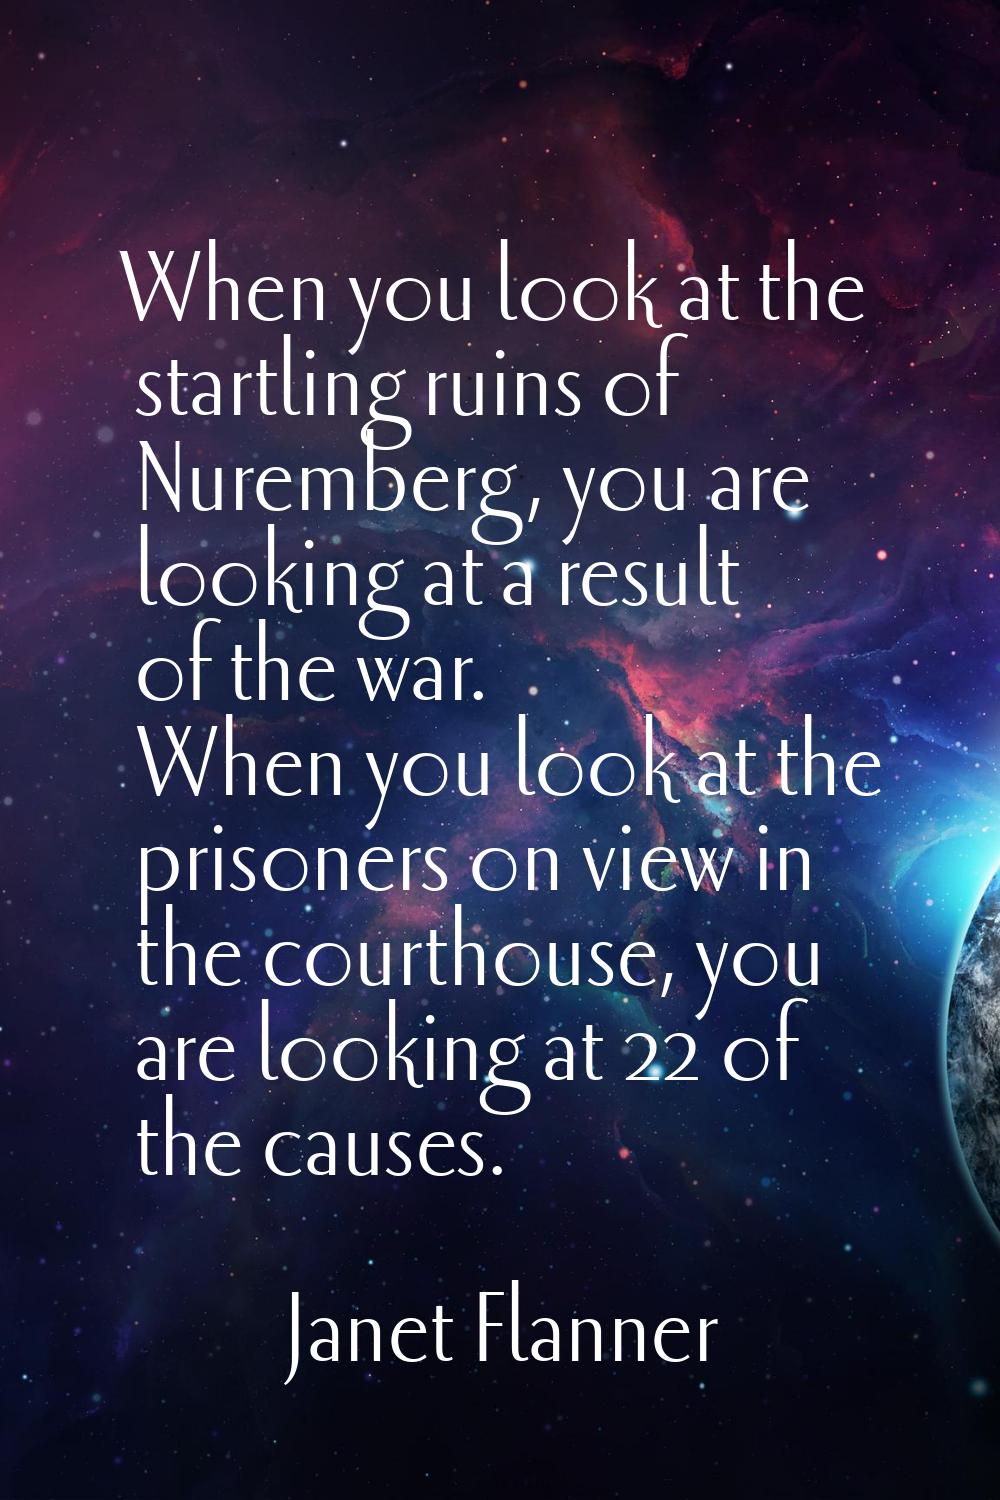 When you look at the startling ruins of Nuremberg, you are looking at a result of the war. When you